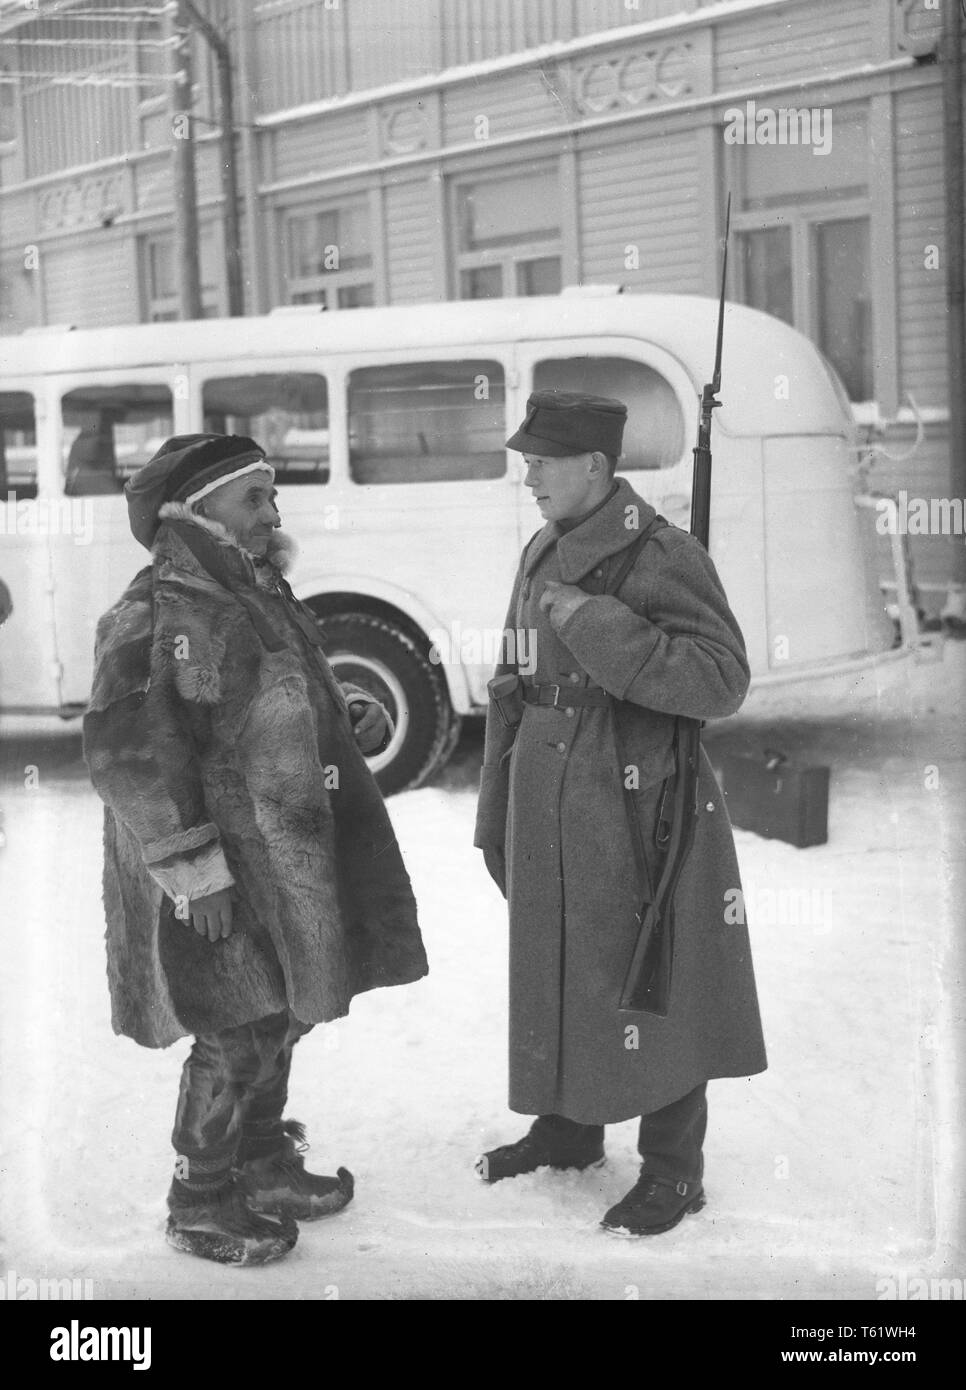 The Winter War. A military conflict between the Soviet union and Finland. It began with a Soviet invasion on november 1939 when Soviet infantery crossed the border on the Karelian Isthmus. Here at Rovaniemi, North Finland a finnish solider and a man of the sami people are standing in the street. January 1940. Photo Kristoffersson ref 95-12-2 Stock Photo